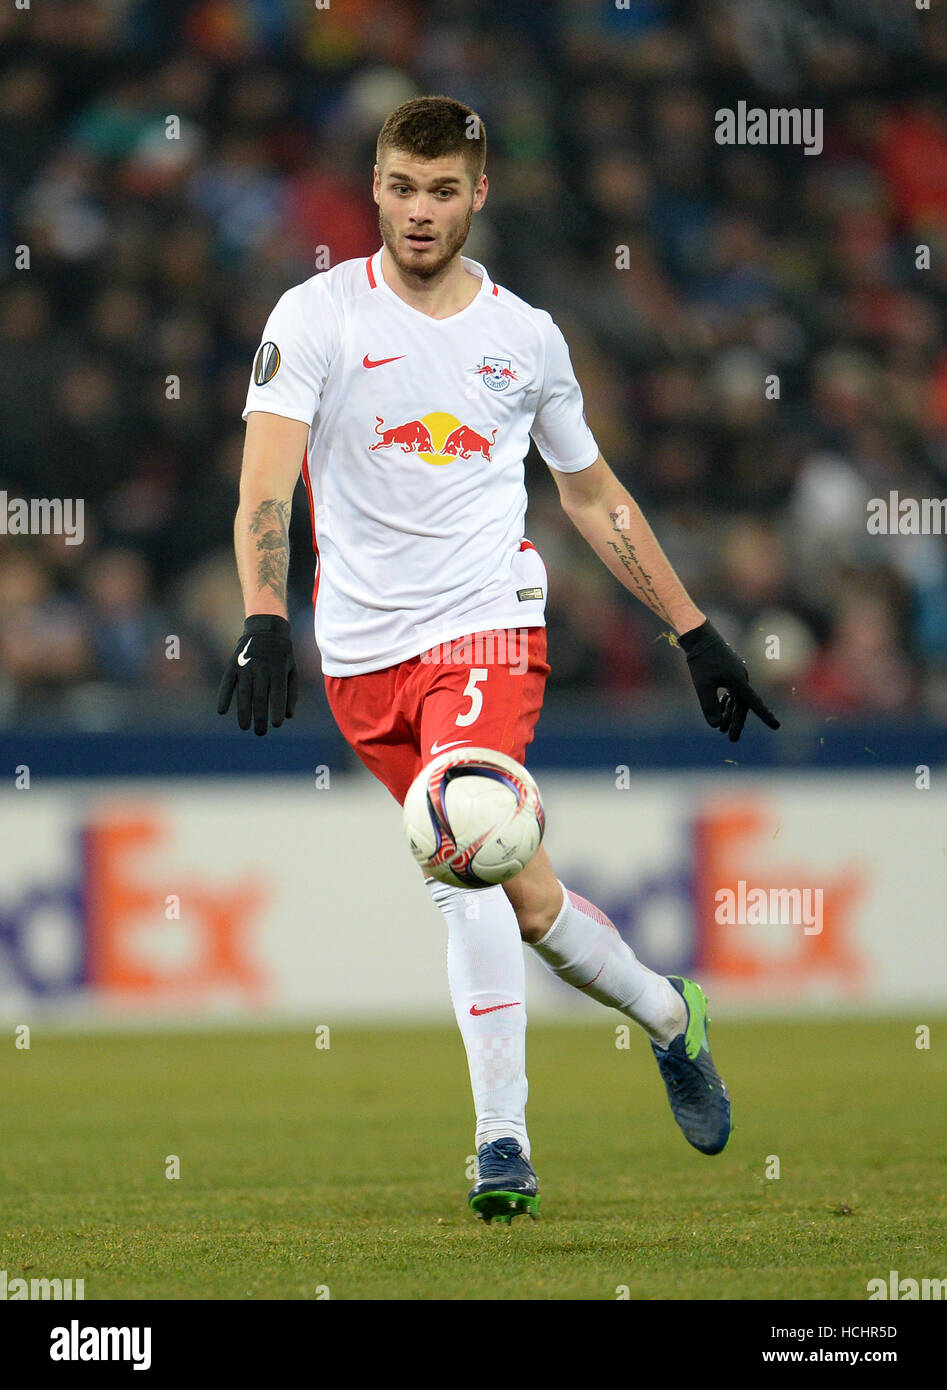 Salzburg, Austria. 8th Dec, 2016. Salzburg's Duje Caleta-Car in action during the Europa League group phase soccer match between RB Salzburg and FC Schalke 04 at the Red Bull Arena in Salzburg, Austria, 8 December 2016. Photo: Andreas Gebert/dpa/Alamy Live News Stock Photo